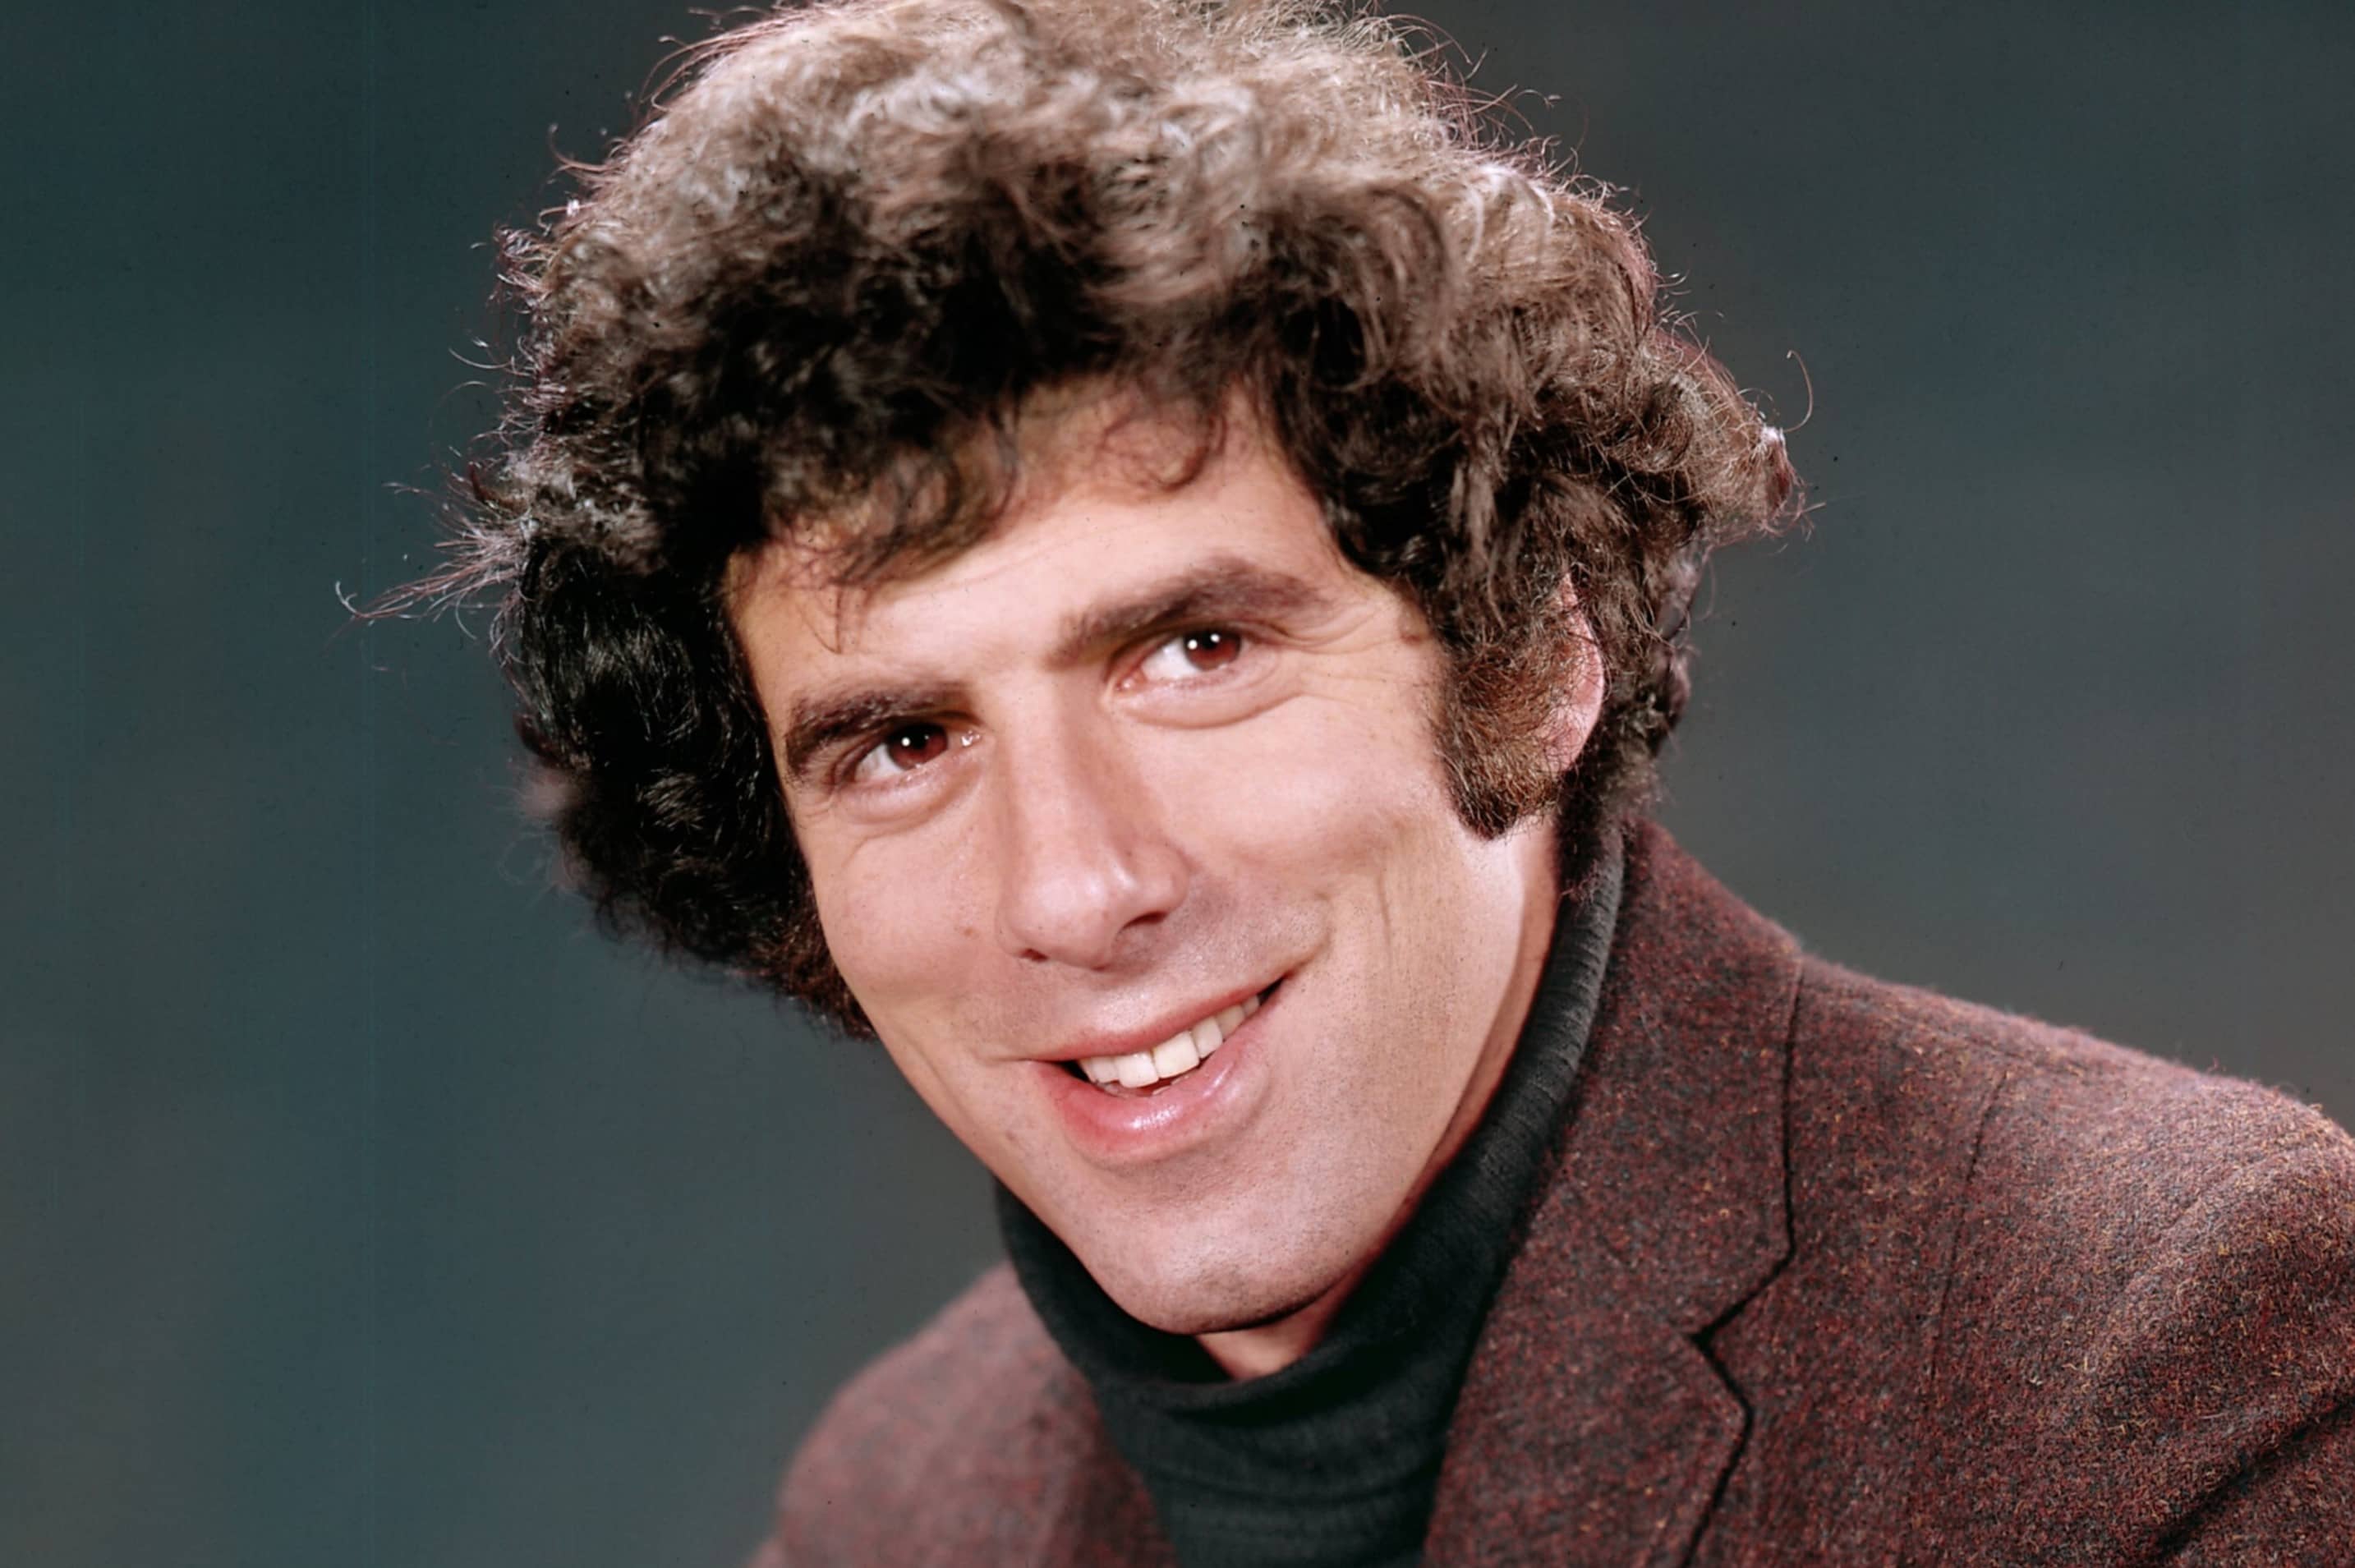 23 Intriguing Facts About Elliott Gould - Facts.net